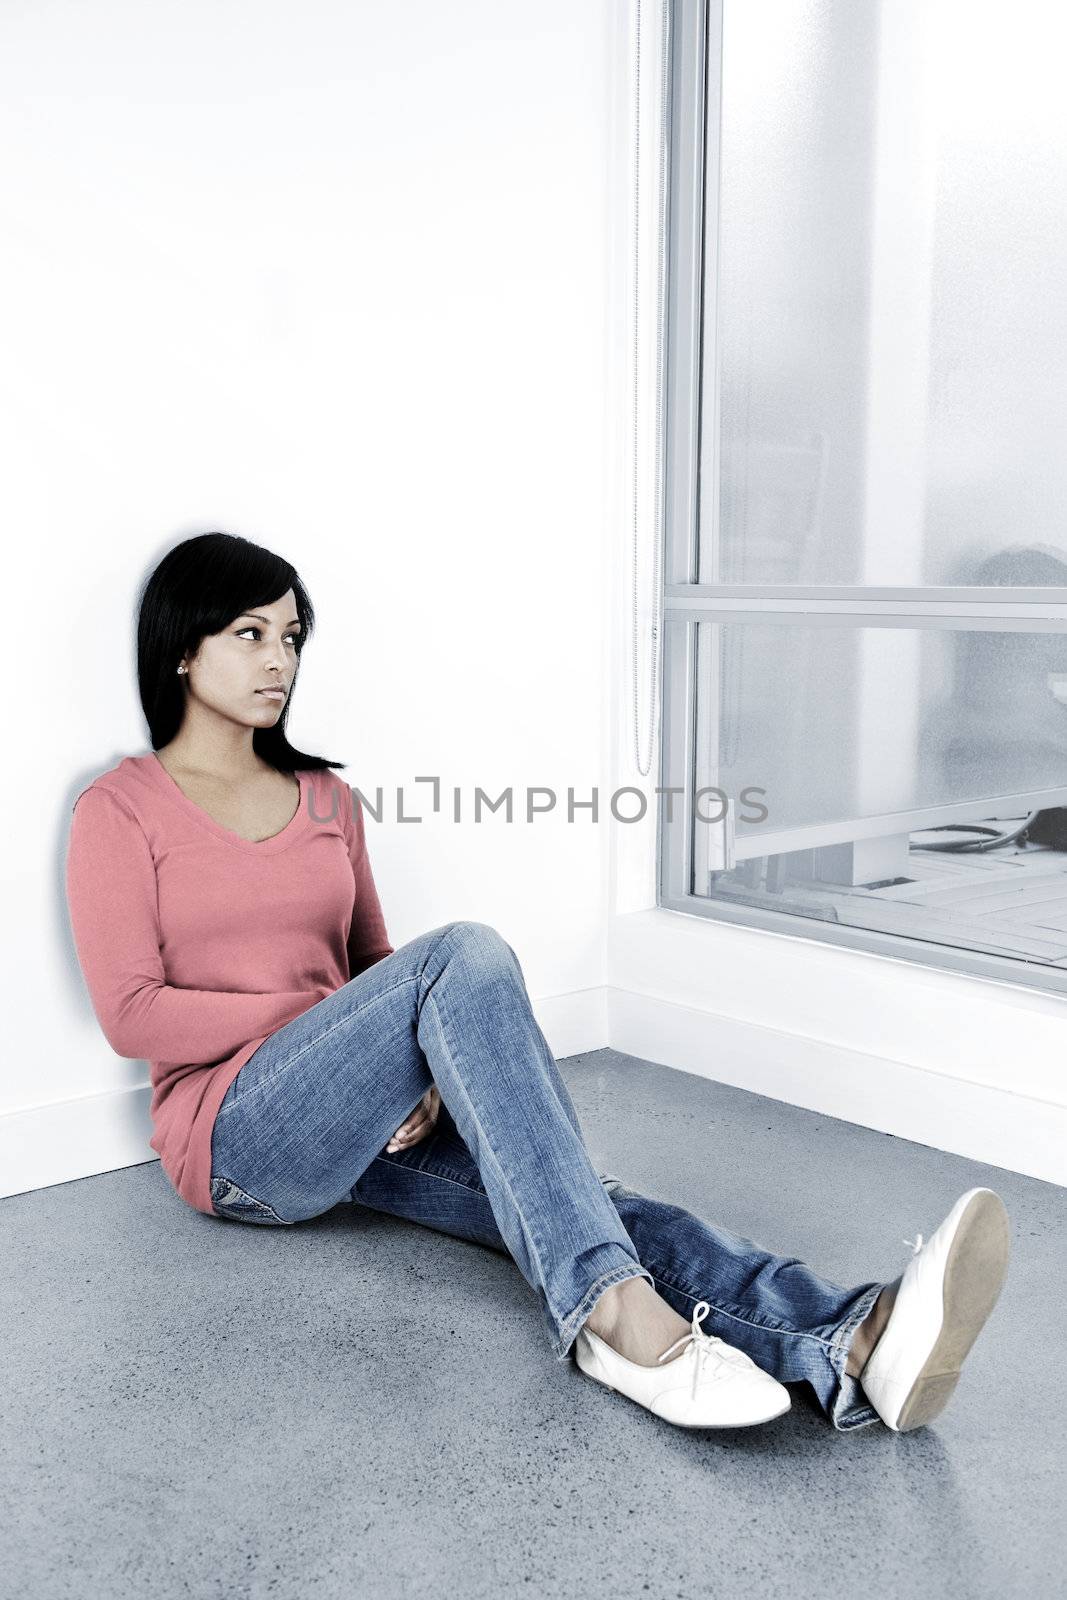 Depressed woman sitting on the floor by elenathewise